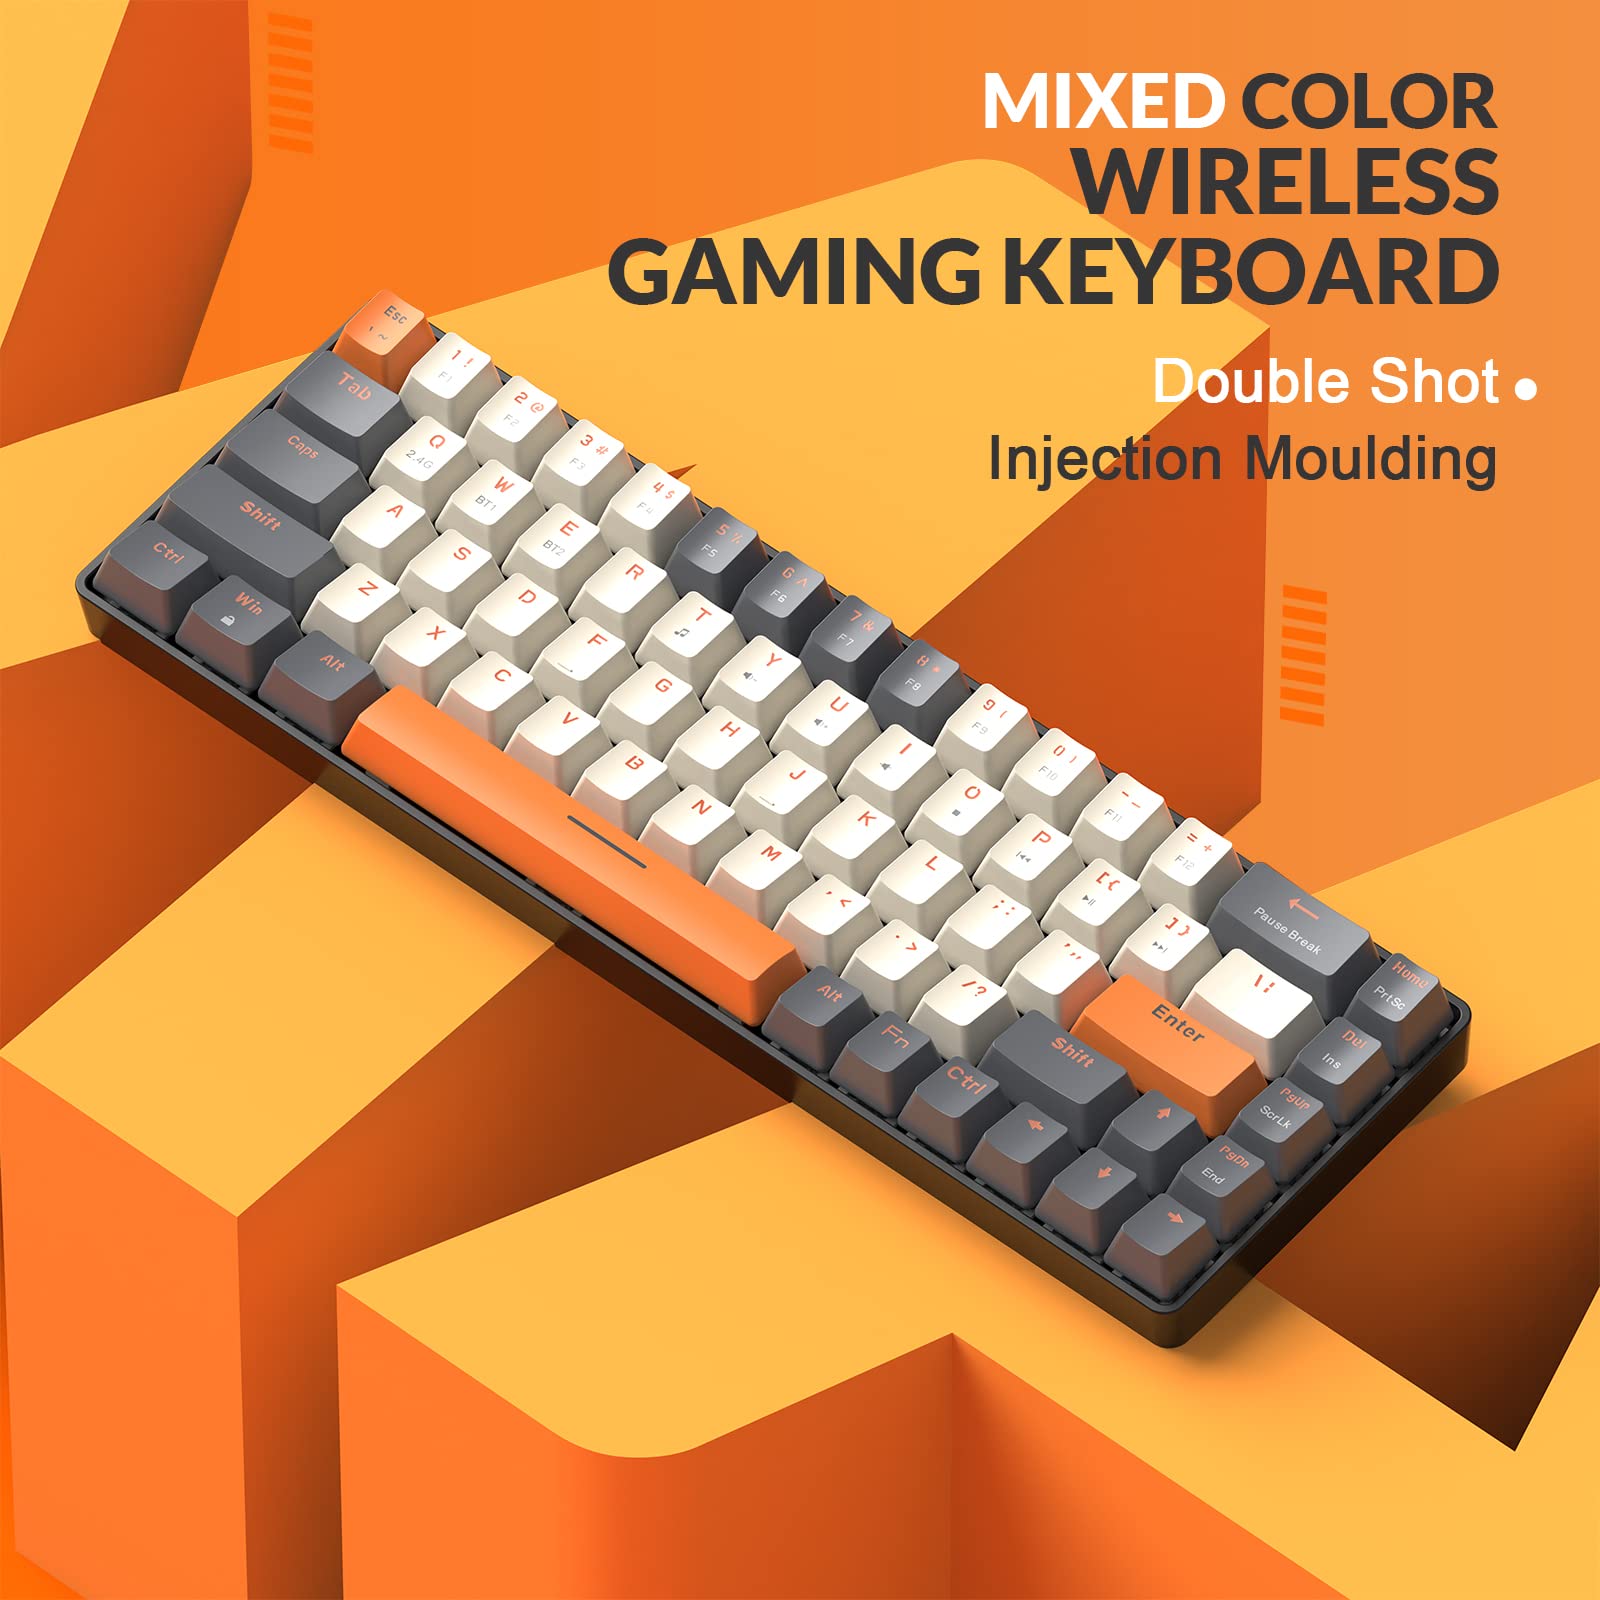 MAGIC-REFINER RK68 60% Wireless Mechanical Keyboard, Bluetooth 5.0/2.4GHz with Dual Mode 2-in-1 Receiver, Compact 68-Key Hot Swappable Gaming Keyboard, Linear Red Switch for PC Mac Xbox Smartphone